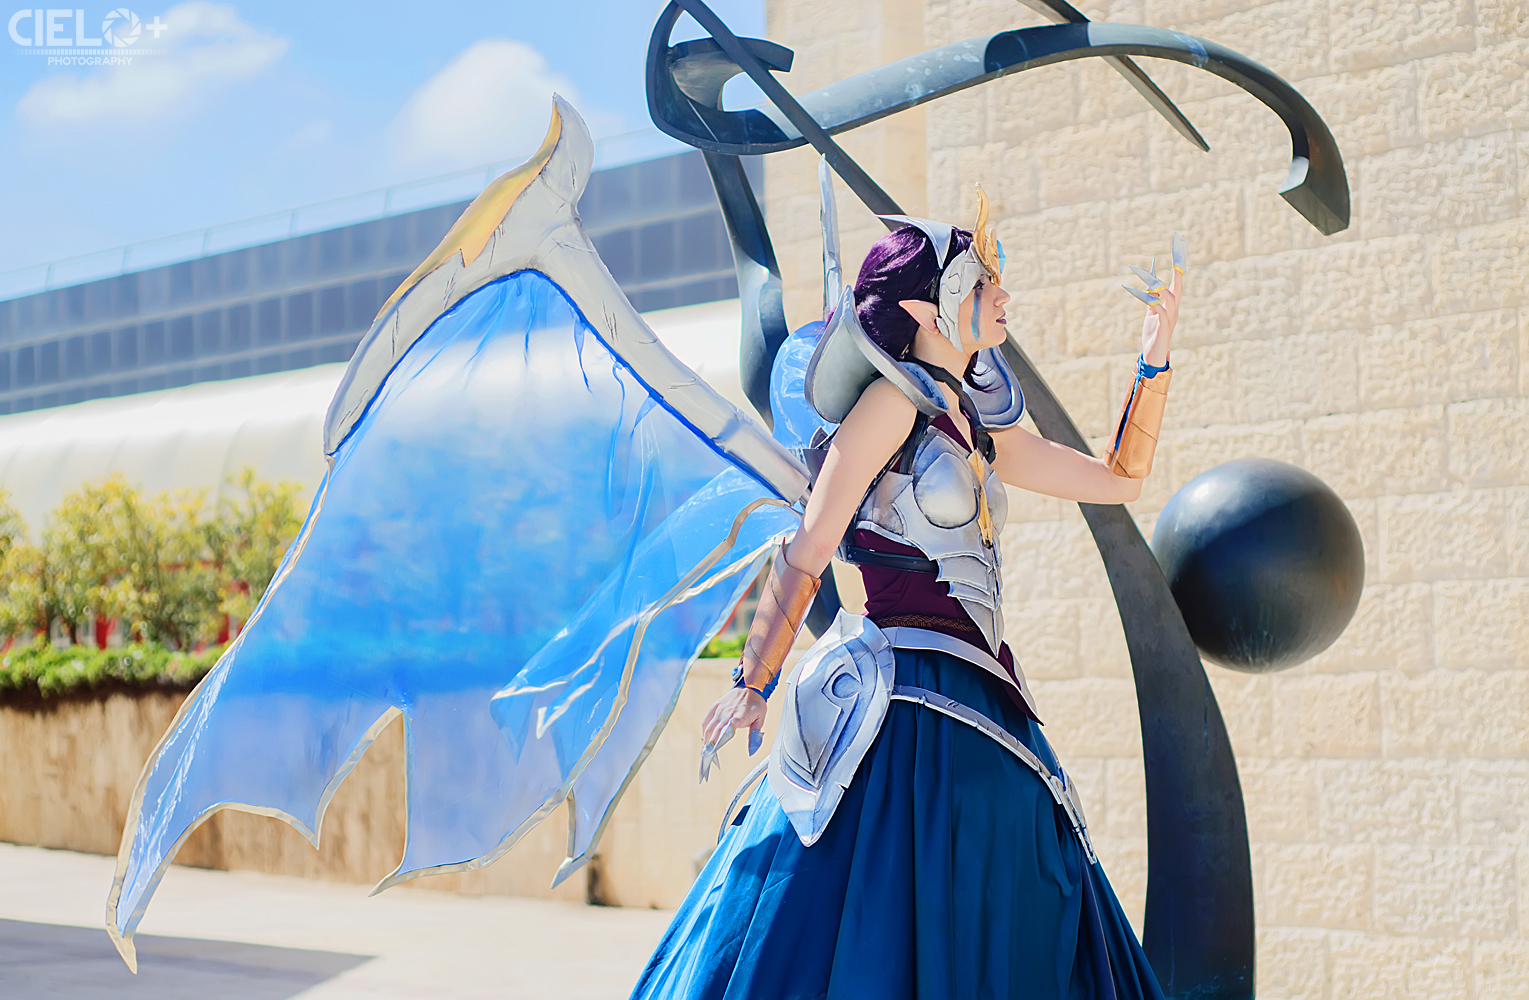 Cospix.net photo featuring Shani Cosplay